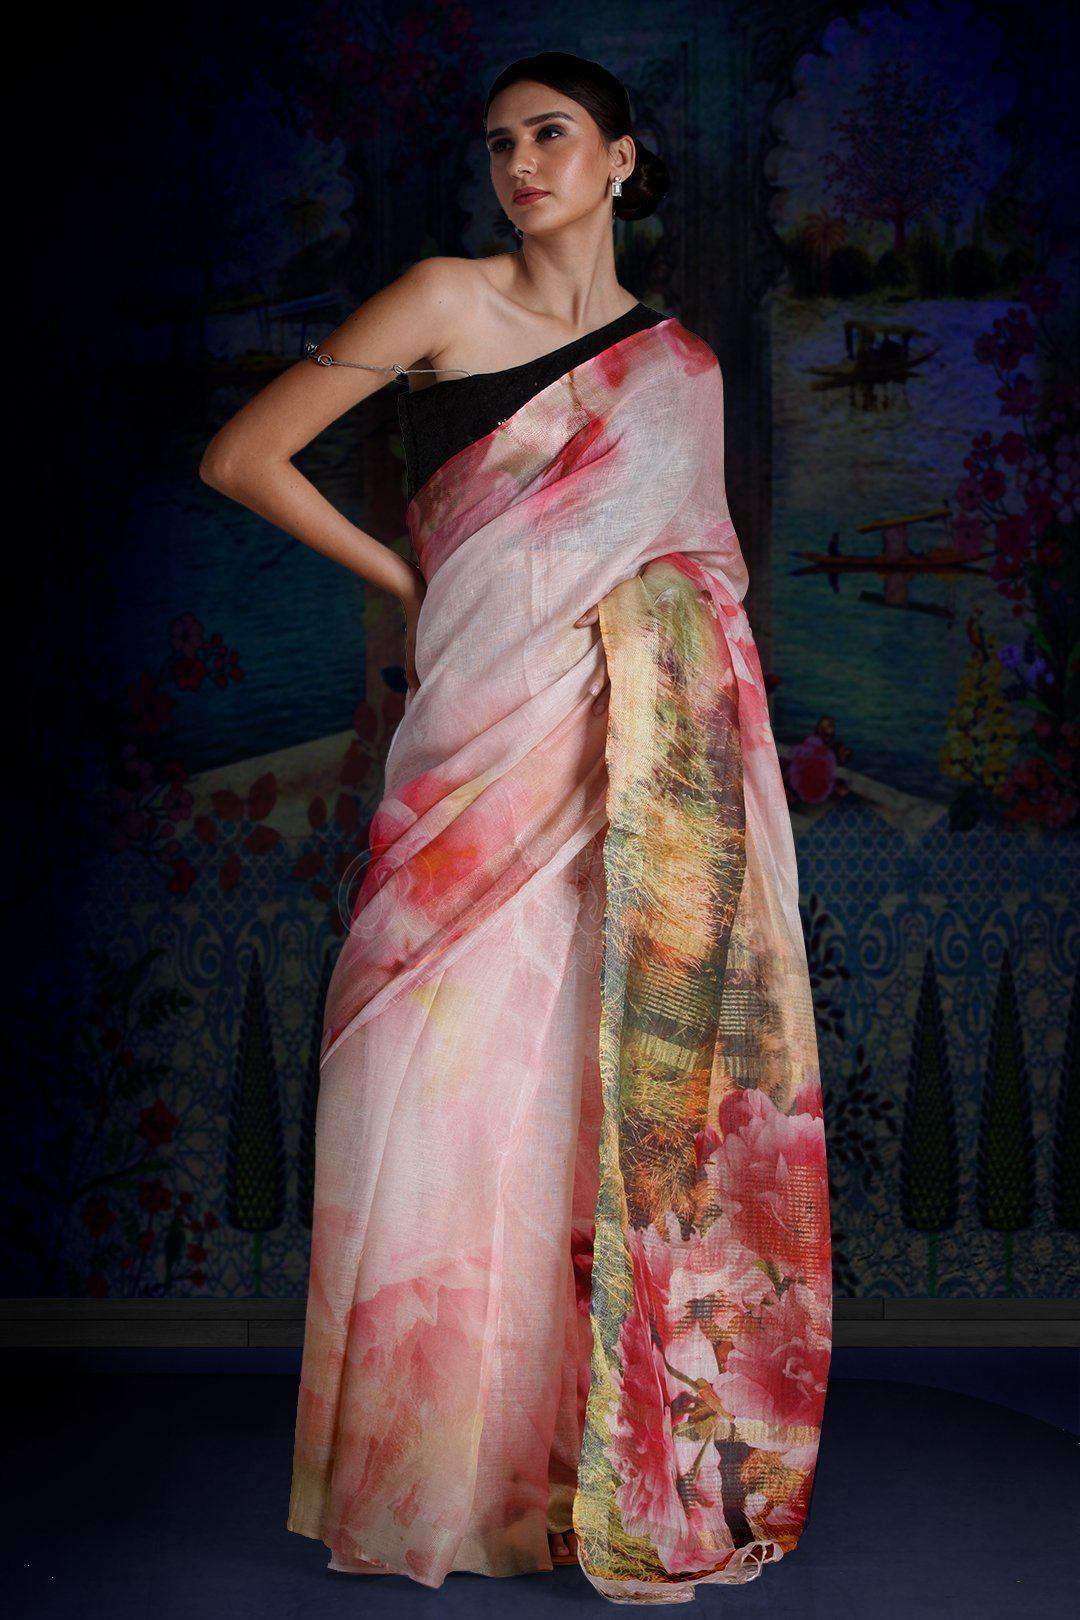 Blush Pink Digital Printed Linen Saree With Zari Border & Pallu Earthen Collection Roopkatha - A Story of Art 